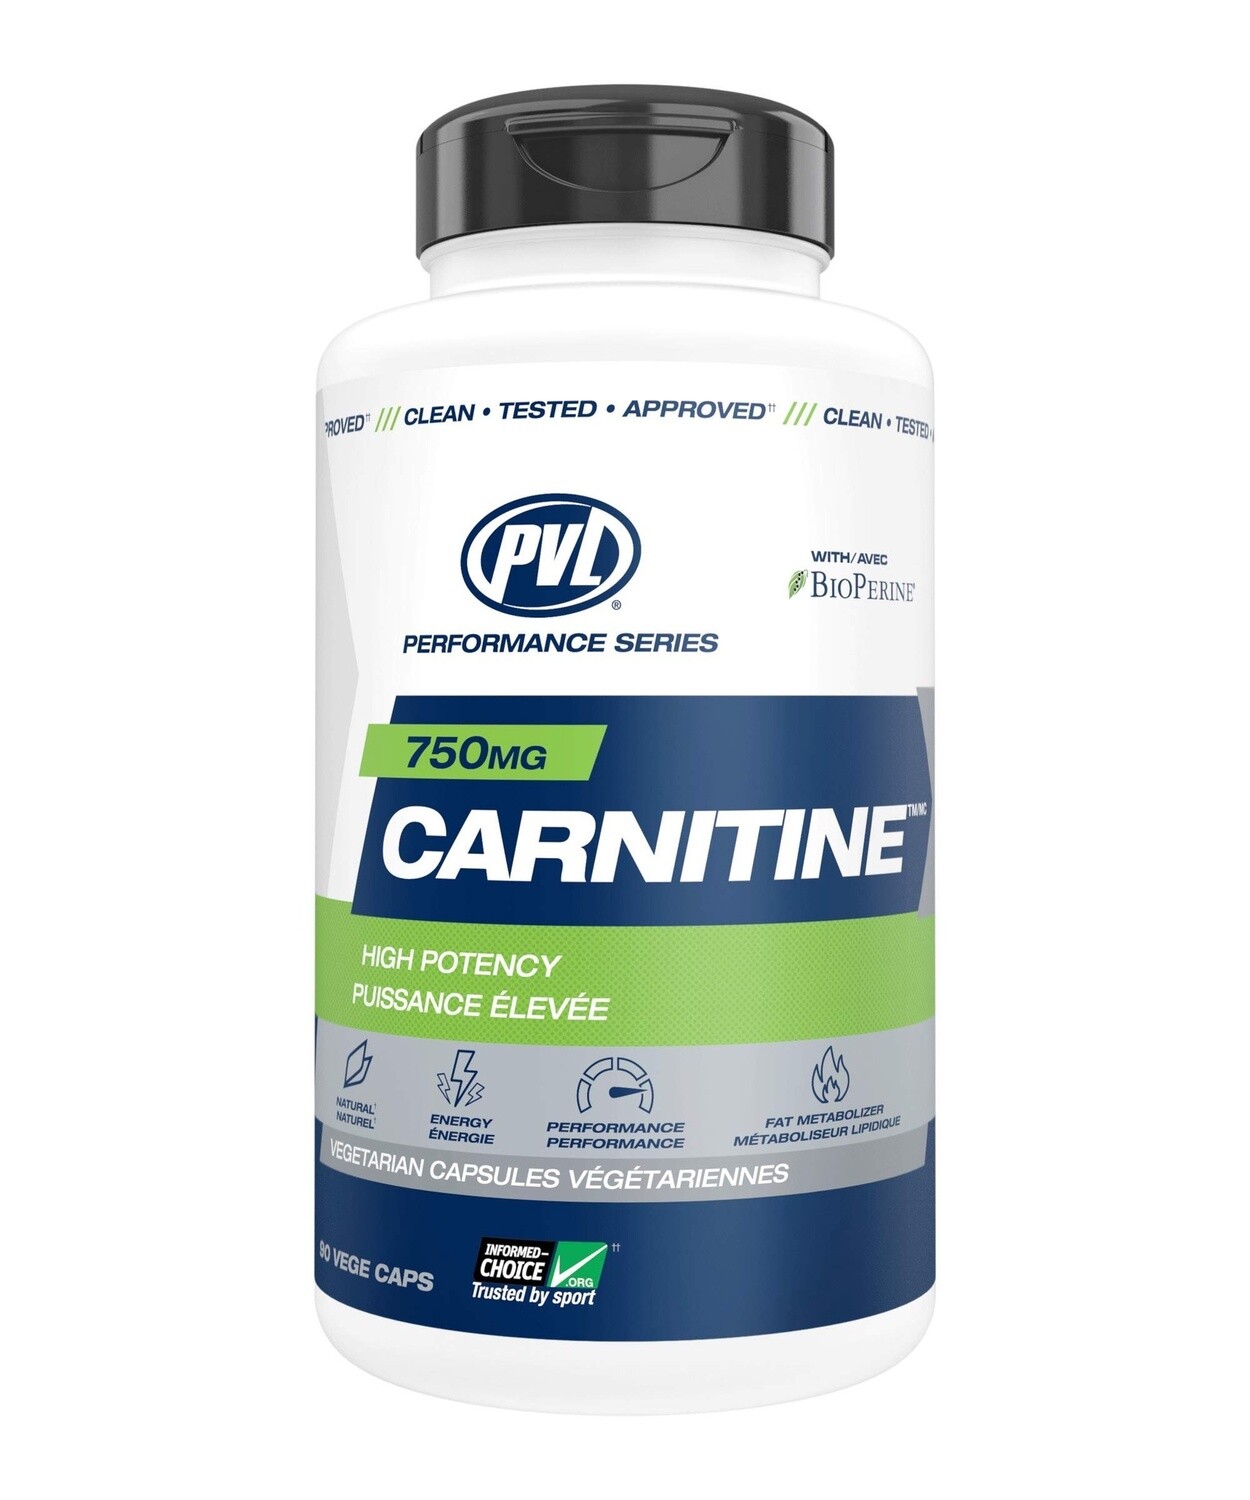 PVL Carnitine, Size: 90 Vegetarian Capsules, flavour: Unflavored